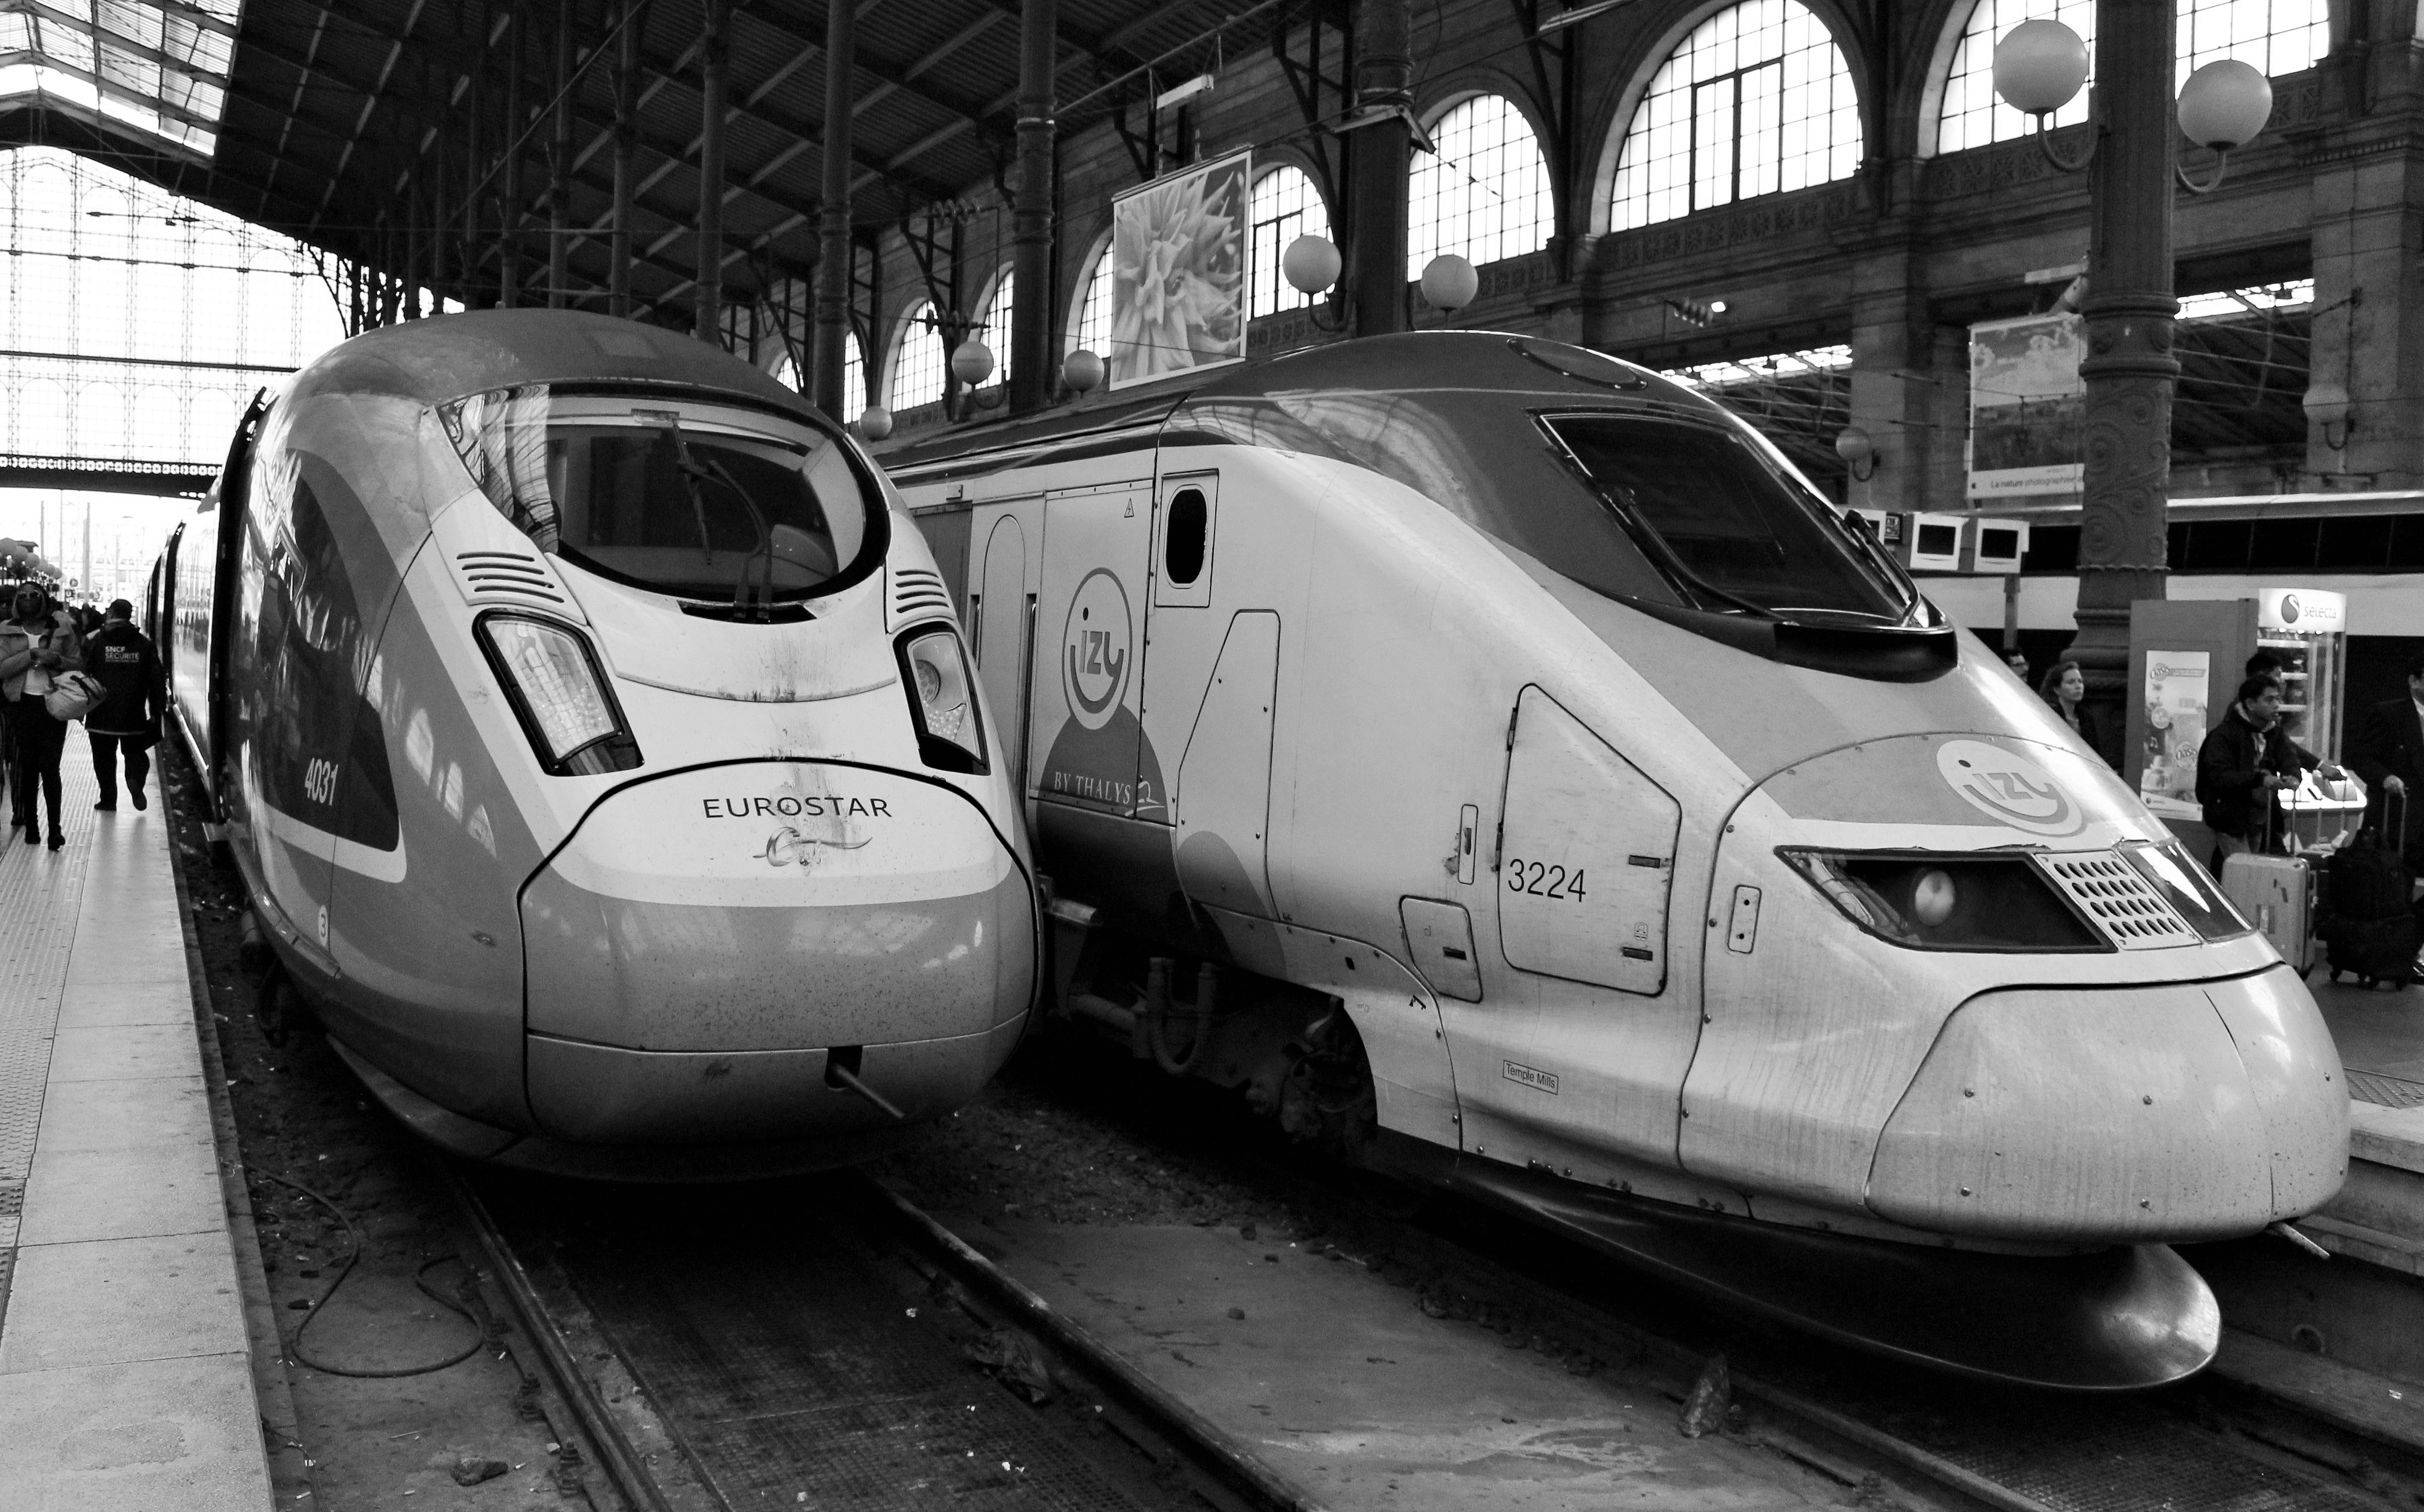 Spain Innovates by the use of High Speed Rail